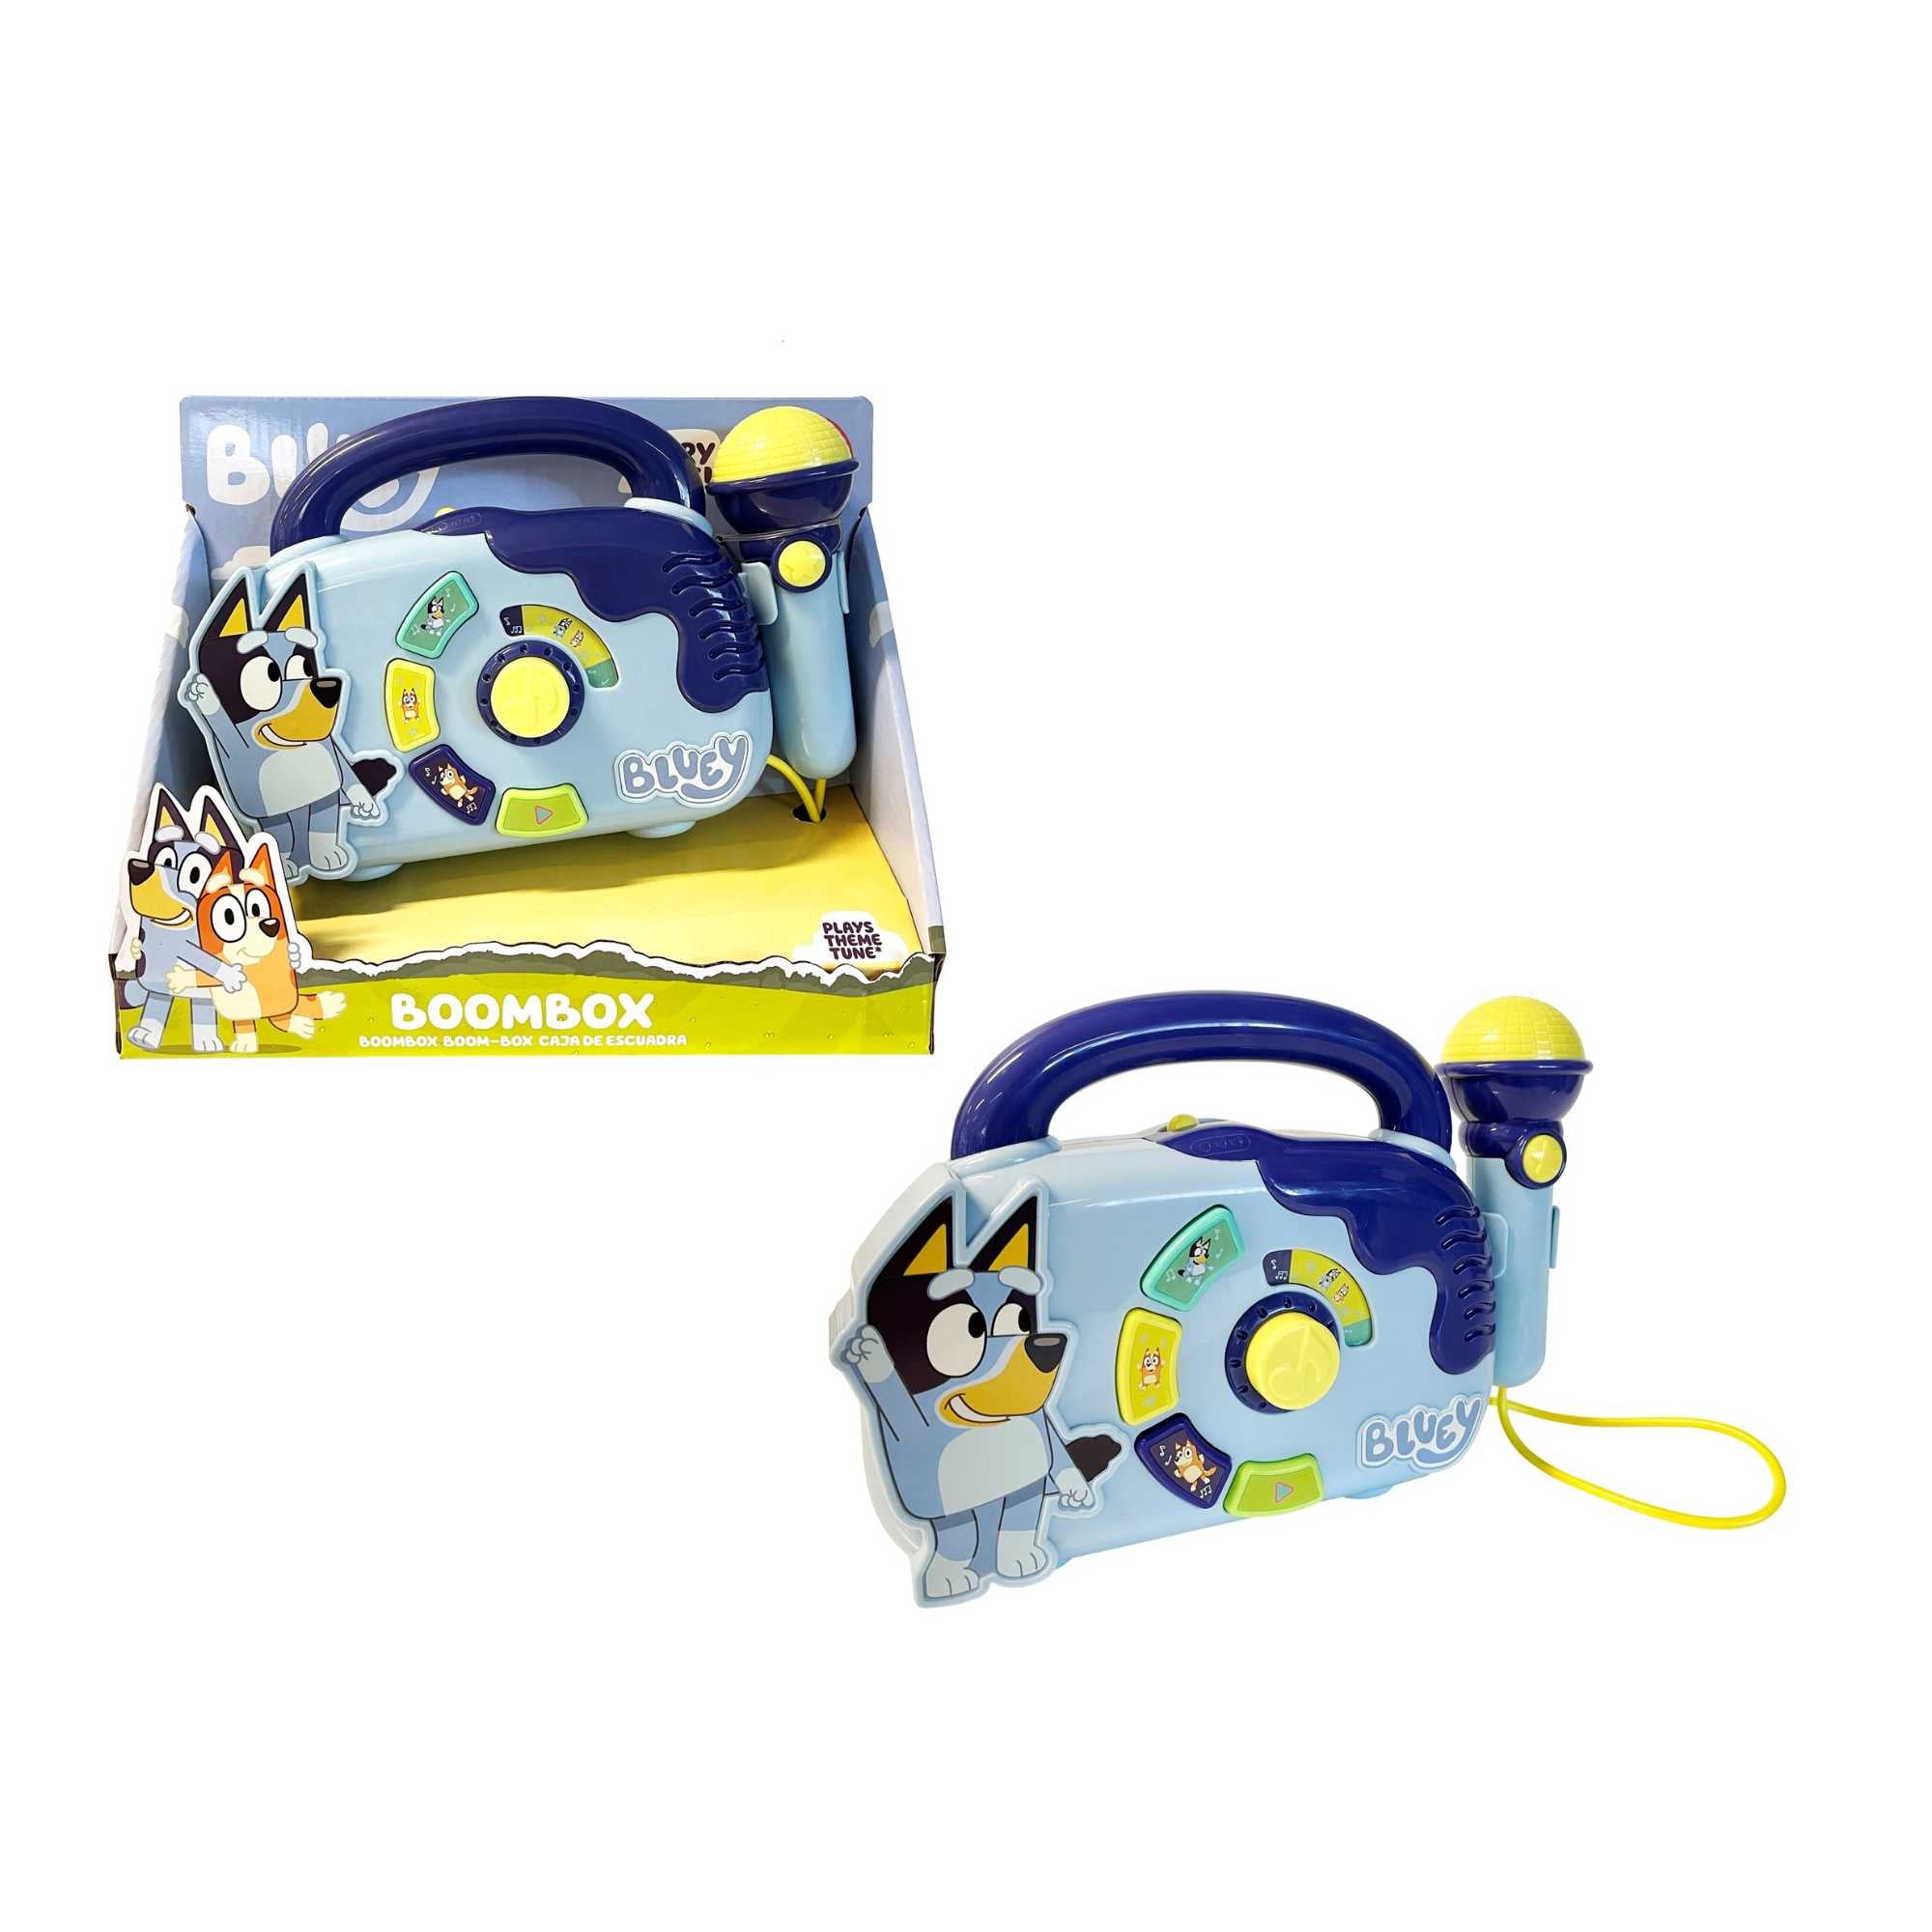 Bluey's Boombox | Includes Microphone